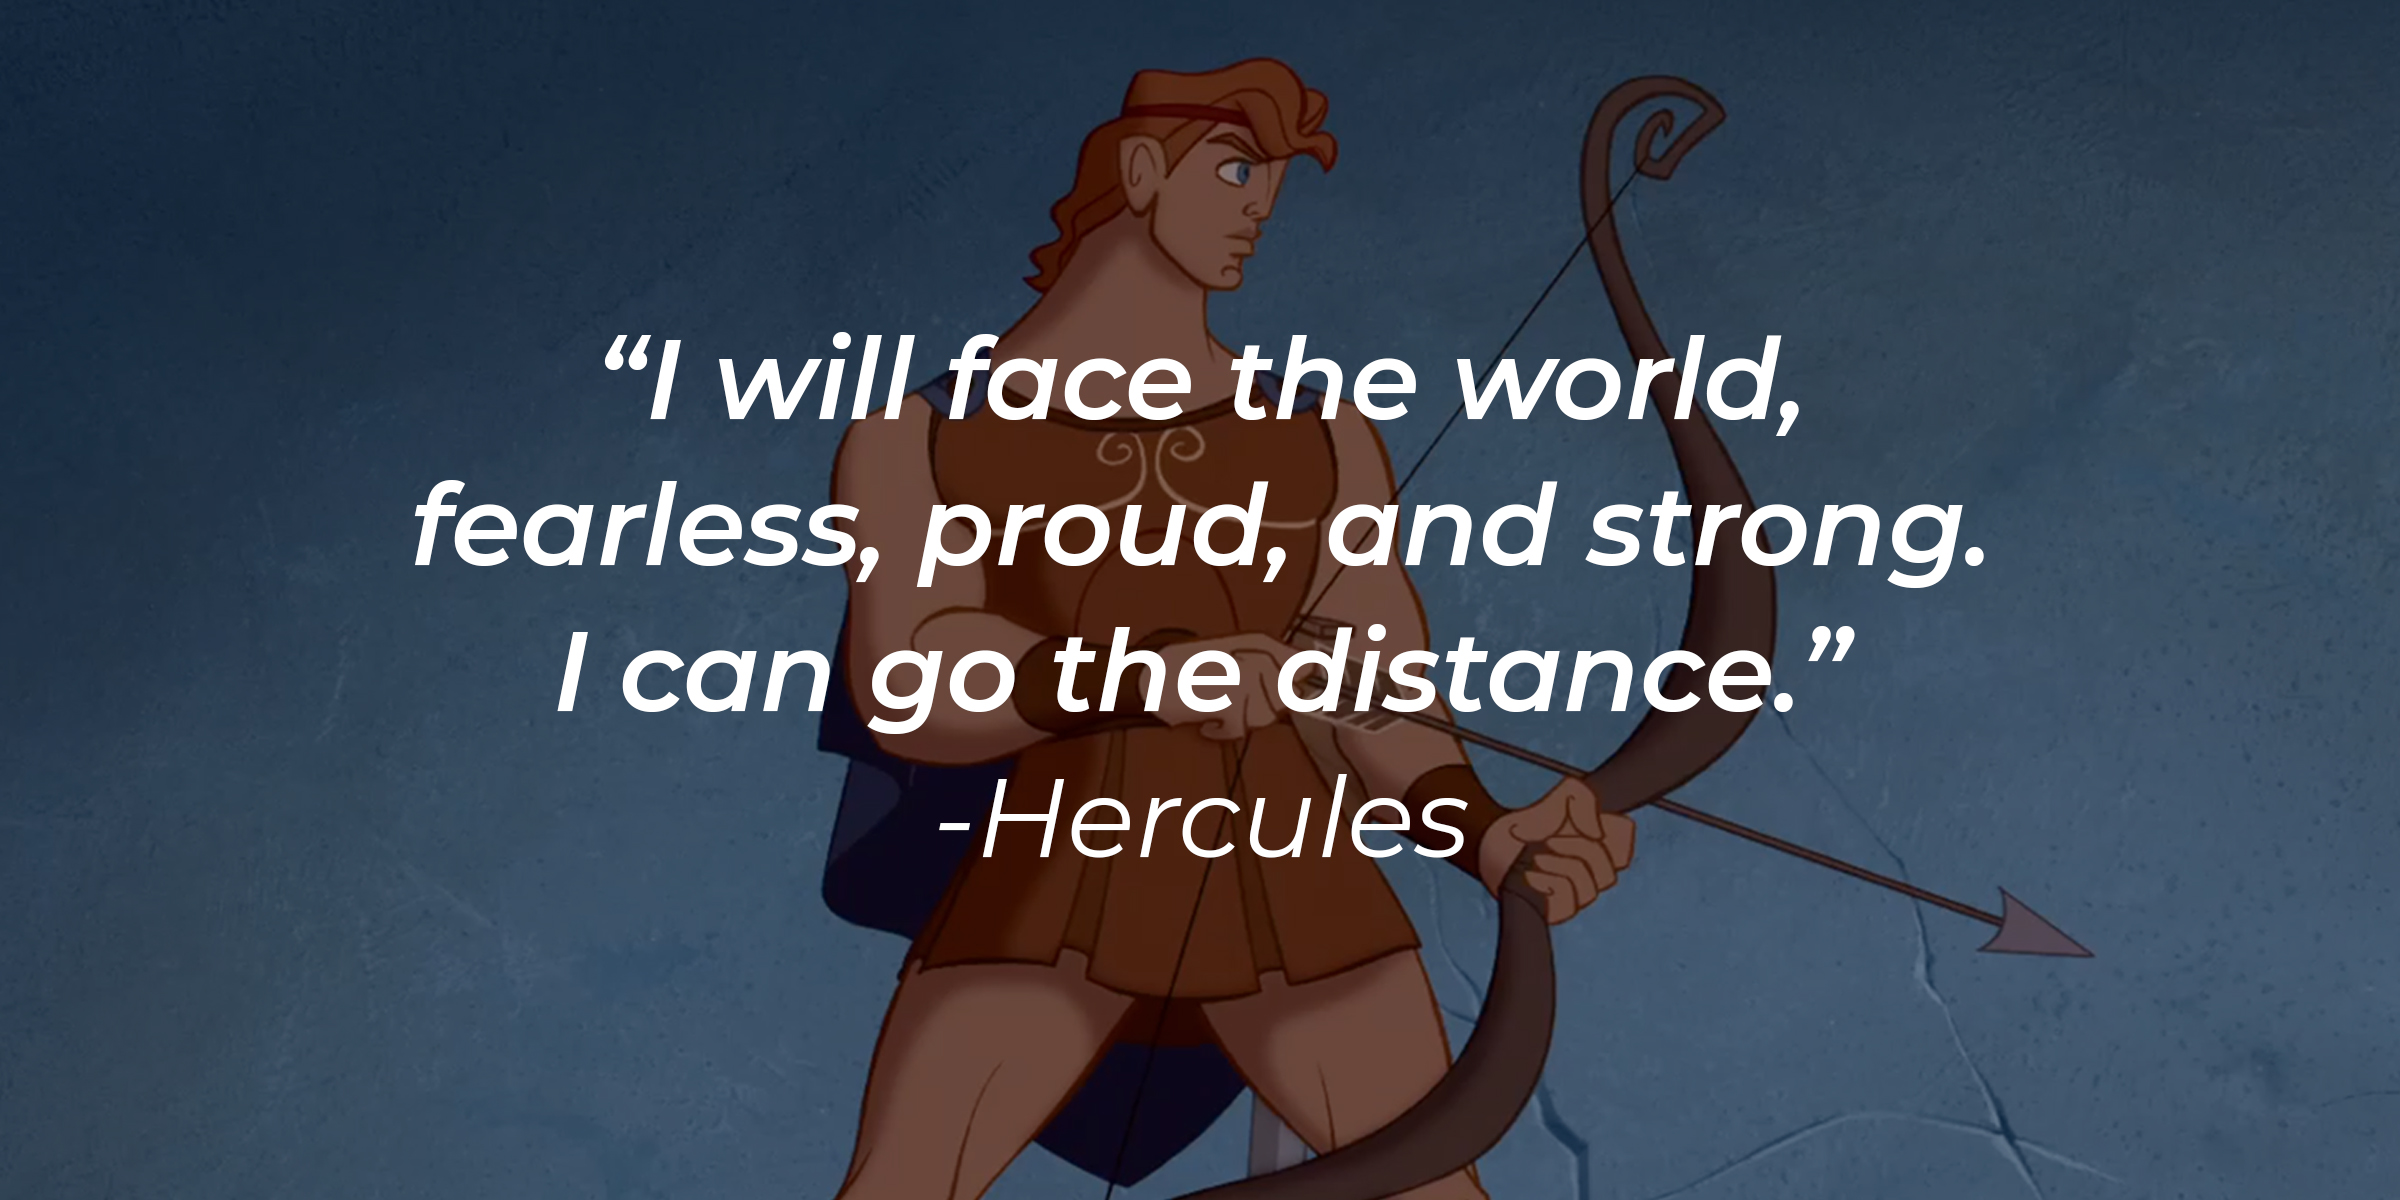 Hercules from the 1997 movie of the same name posing with a bow and arrow with his quote: “I will face the world, fearless, proud, and strong. I can go the distance." | Source: Facebook.com/DisneyHercules